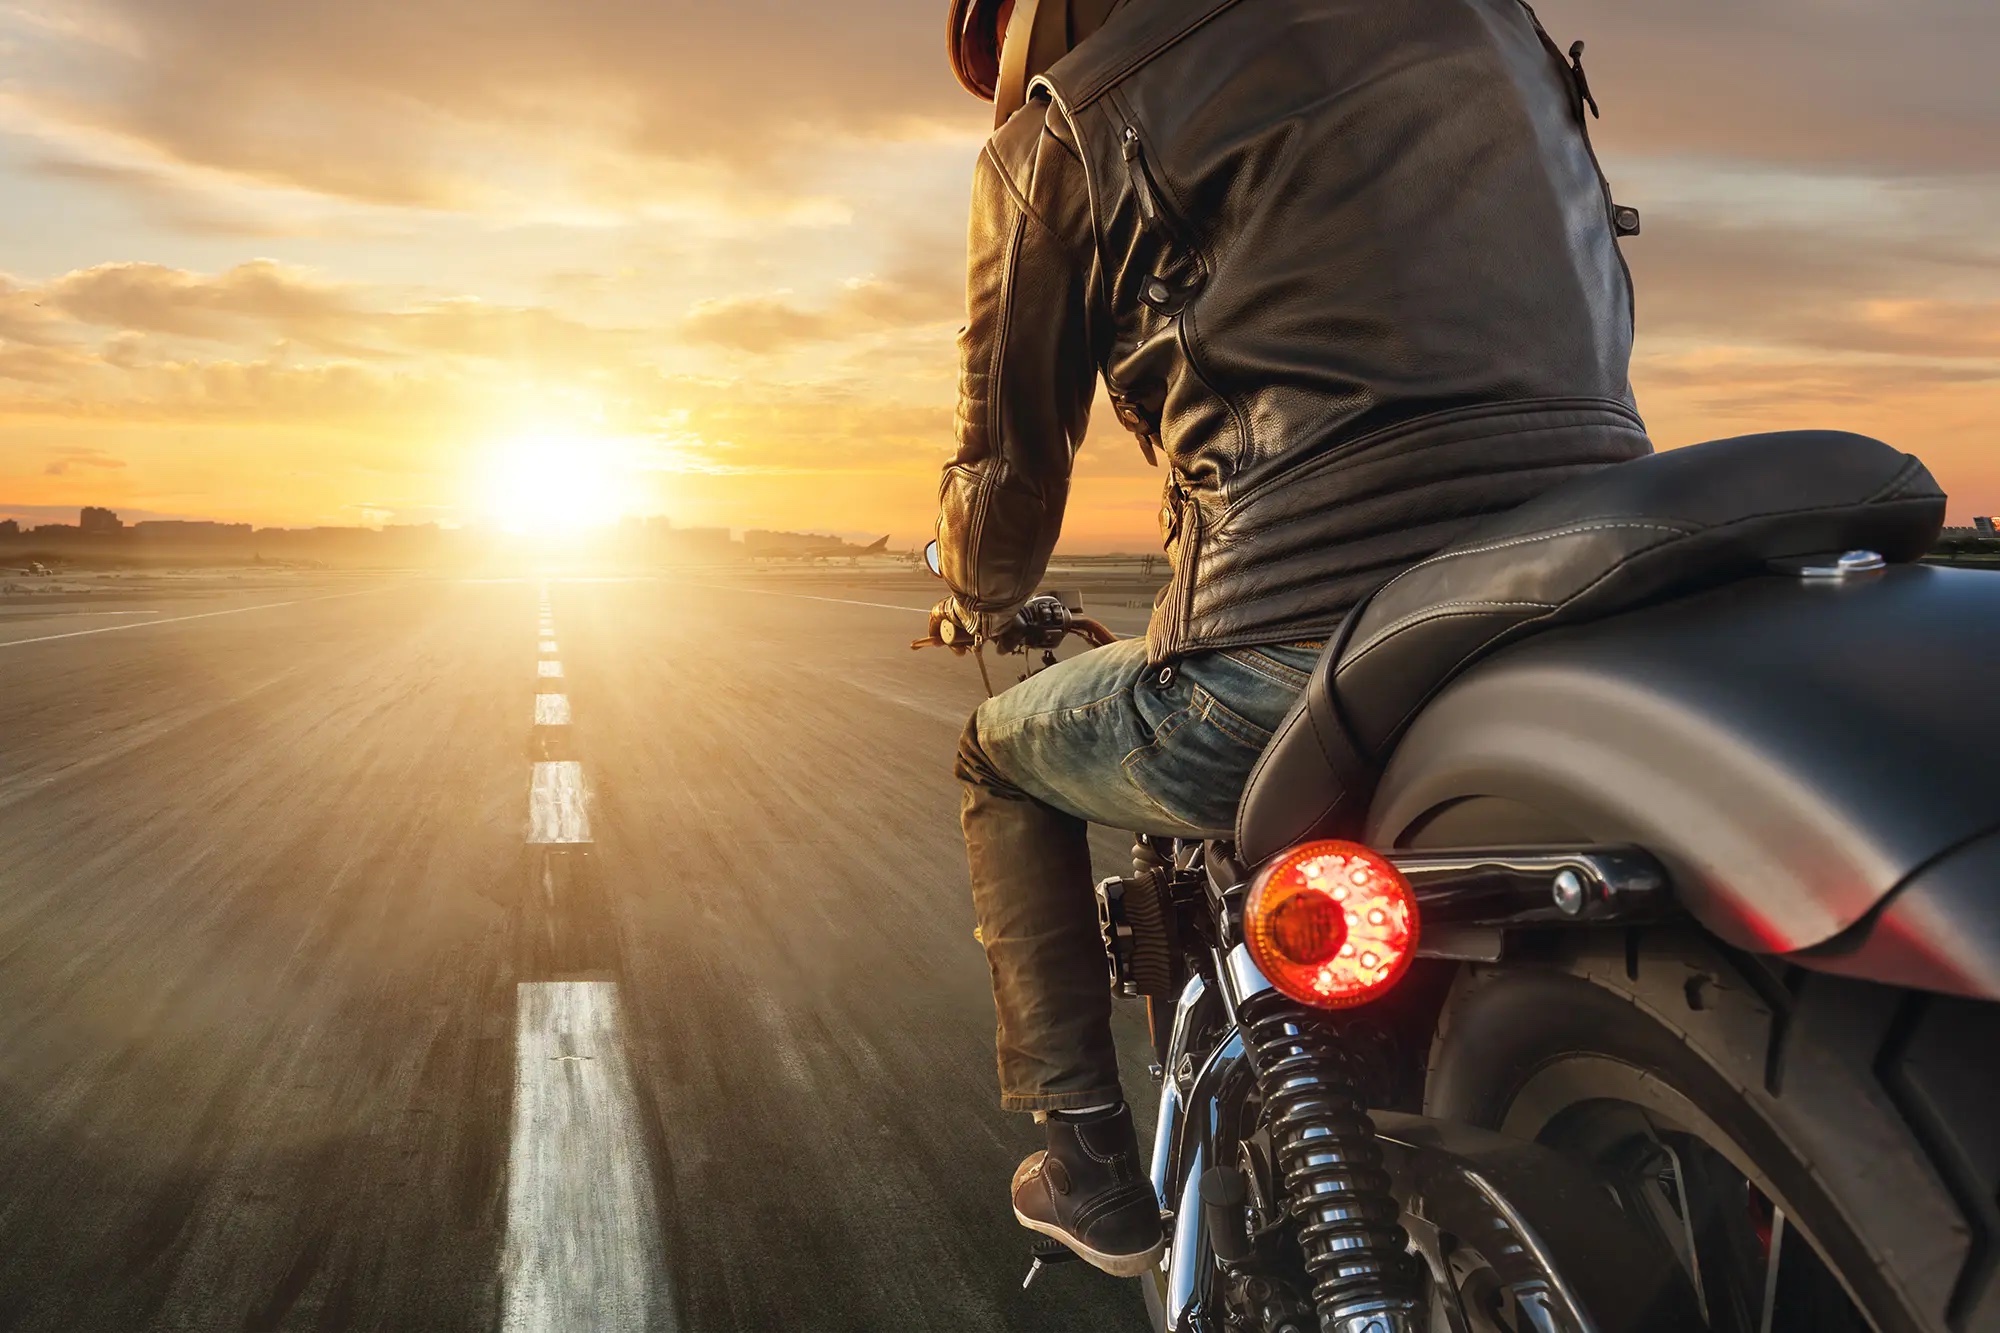 A motorcyclist hooning into the sunset. Media sourced from the New York Post.